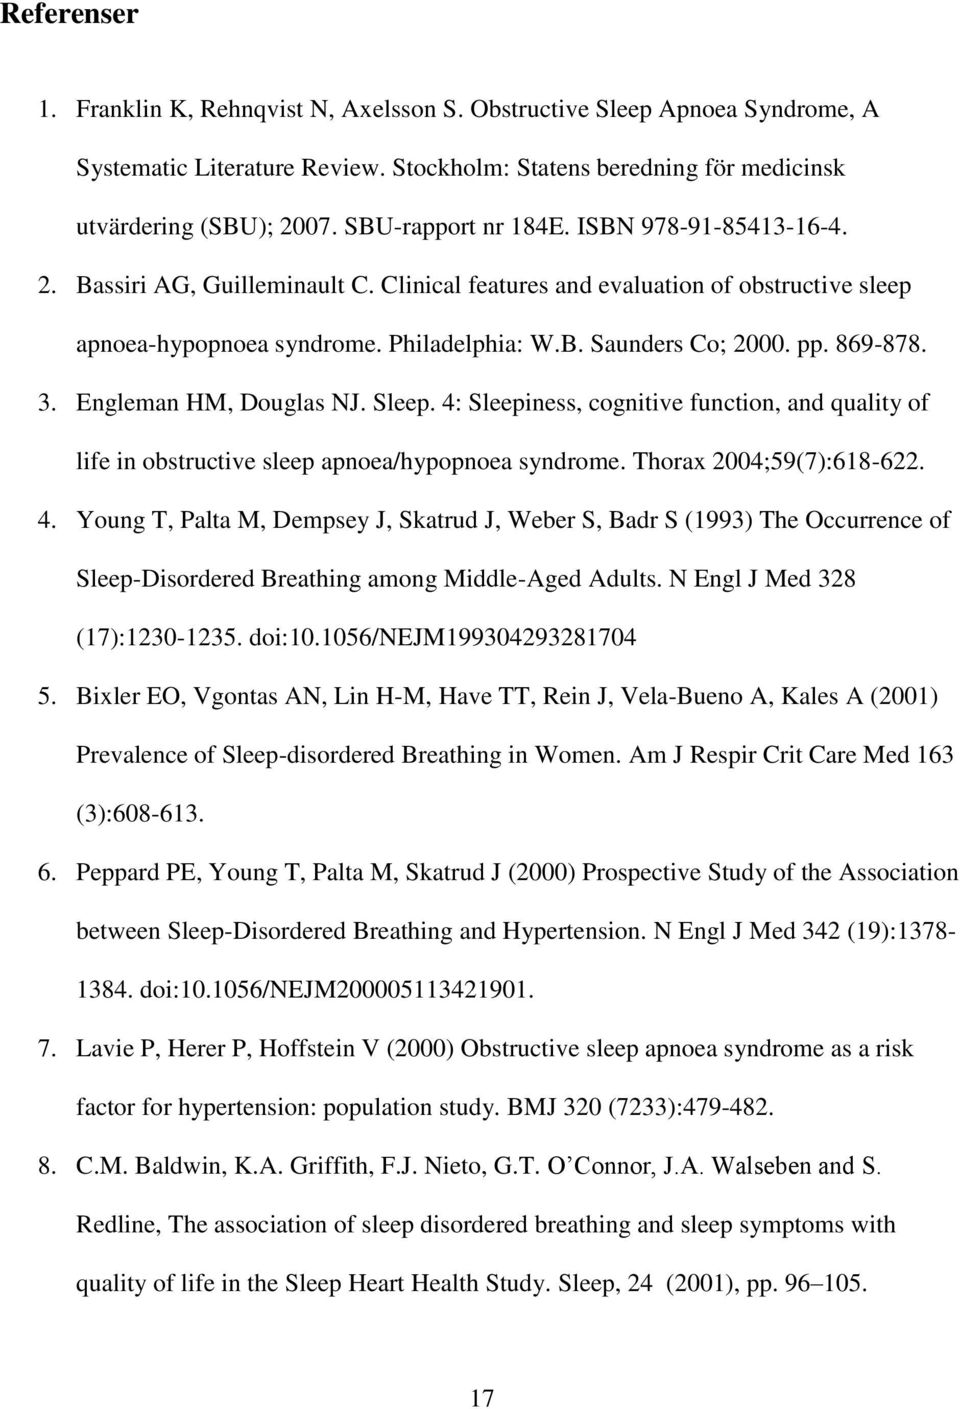 869-878. 3. Engleman HM, Douglas NJ. Sleep. 4: Sleepiness, cognitive function, and quality of life in obstructive sleep apnoea/hypopnoea syndrome. Thorax 2004;59(7):618-622. 4. Young T, Palta M, Dempsey J, Skatrud J, Weber S, Badr S (1993) The Occurrence of Sleep-Disordered Breathing among Middle-Aged Adults.